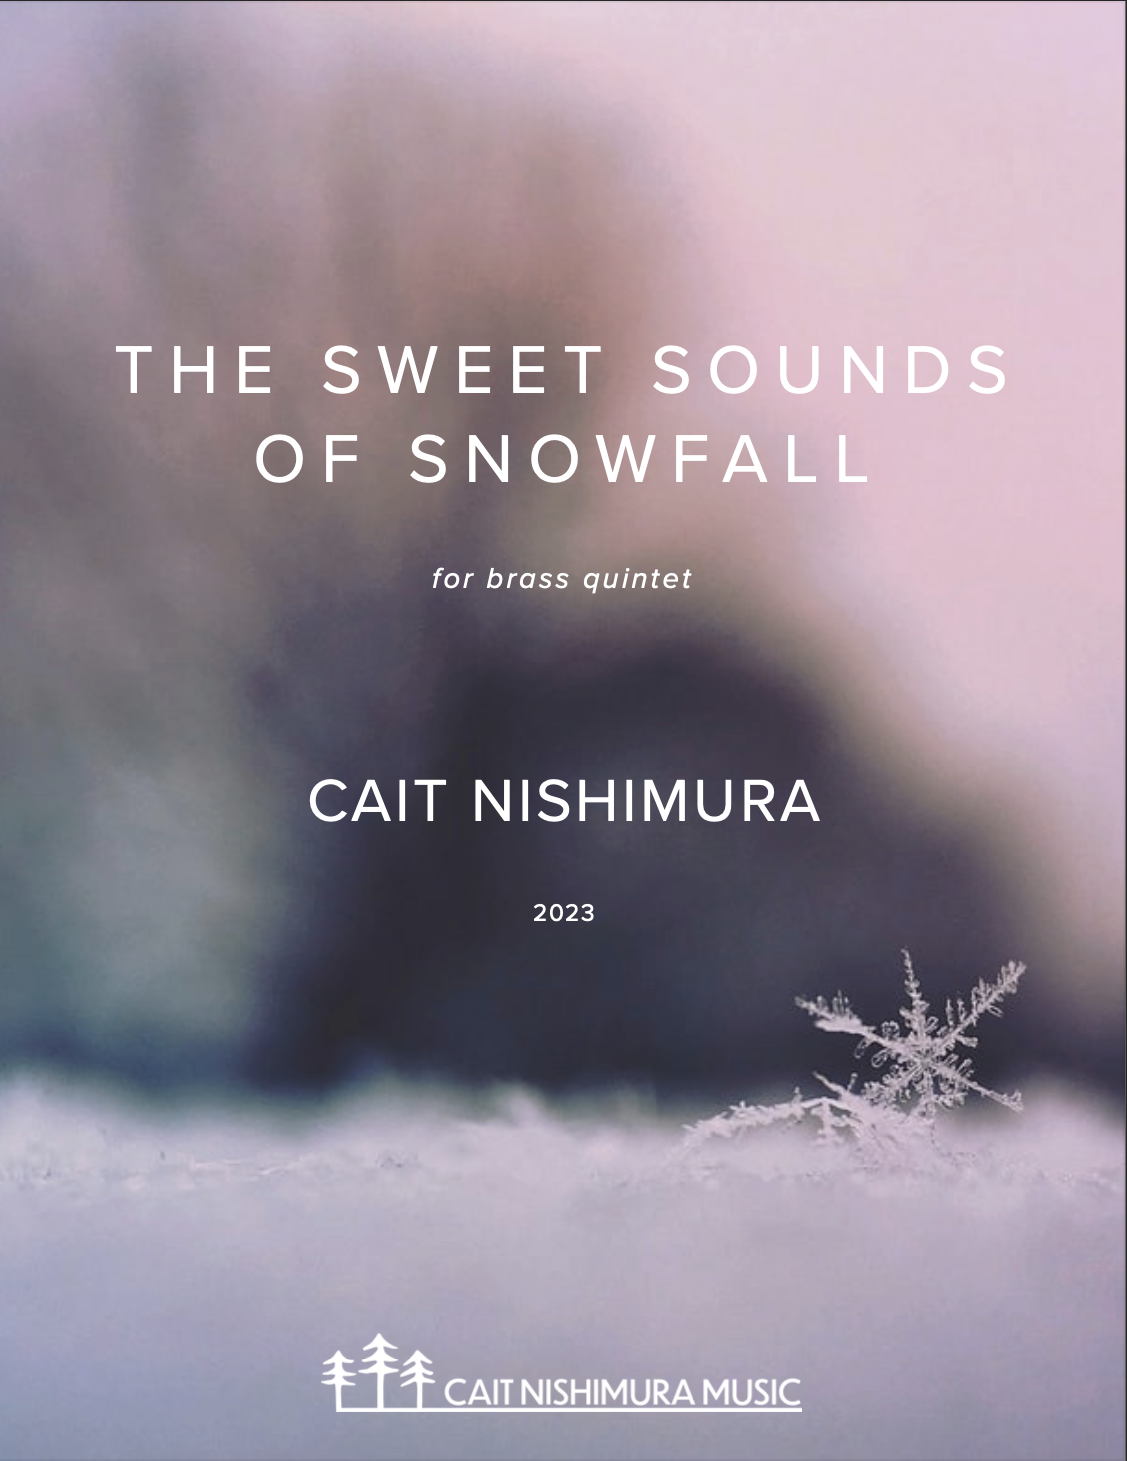 The Sweet Sounds Of Snowfall (Brass Quintet Version) by Cait Nishimura